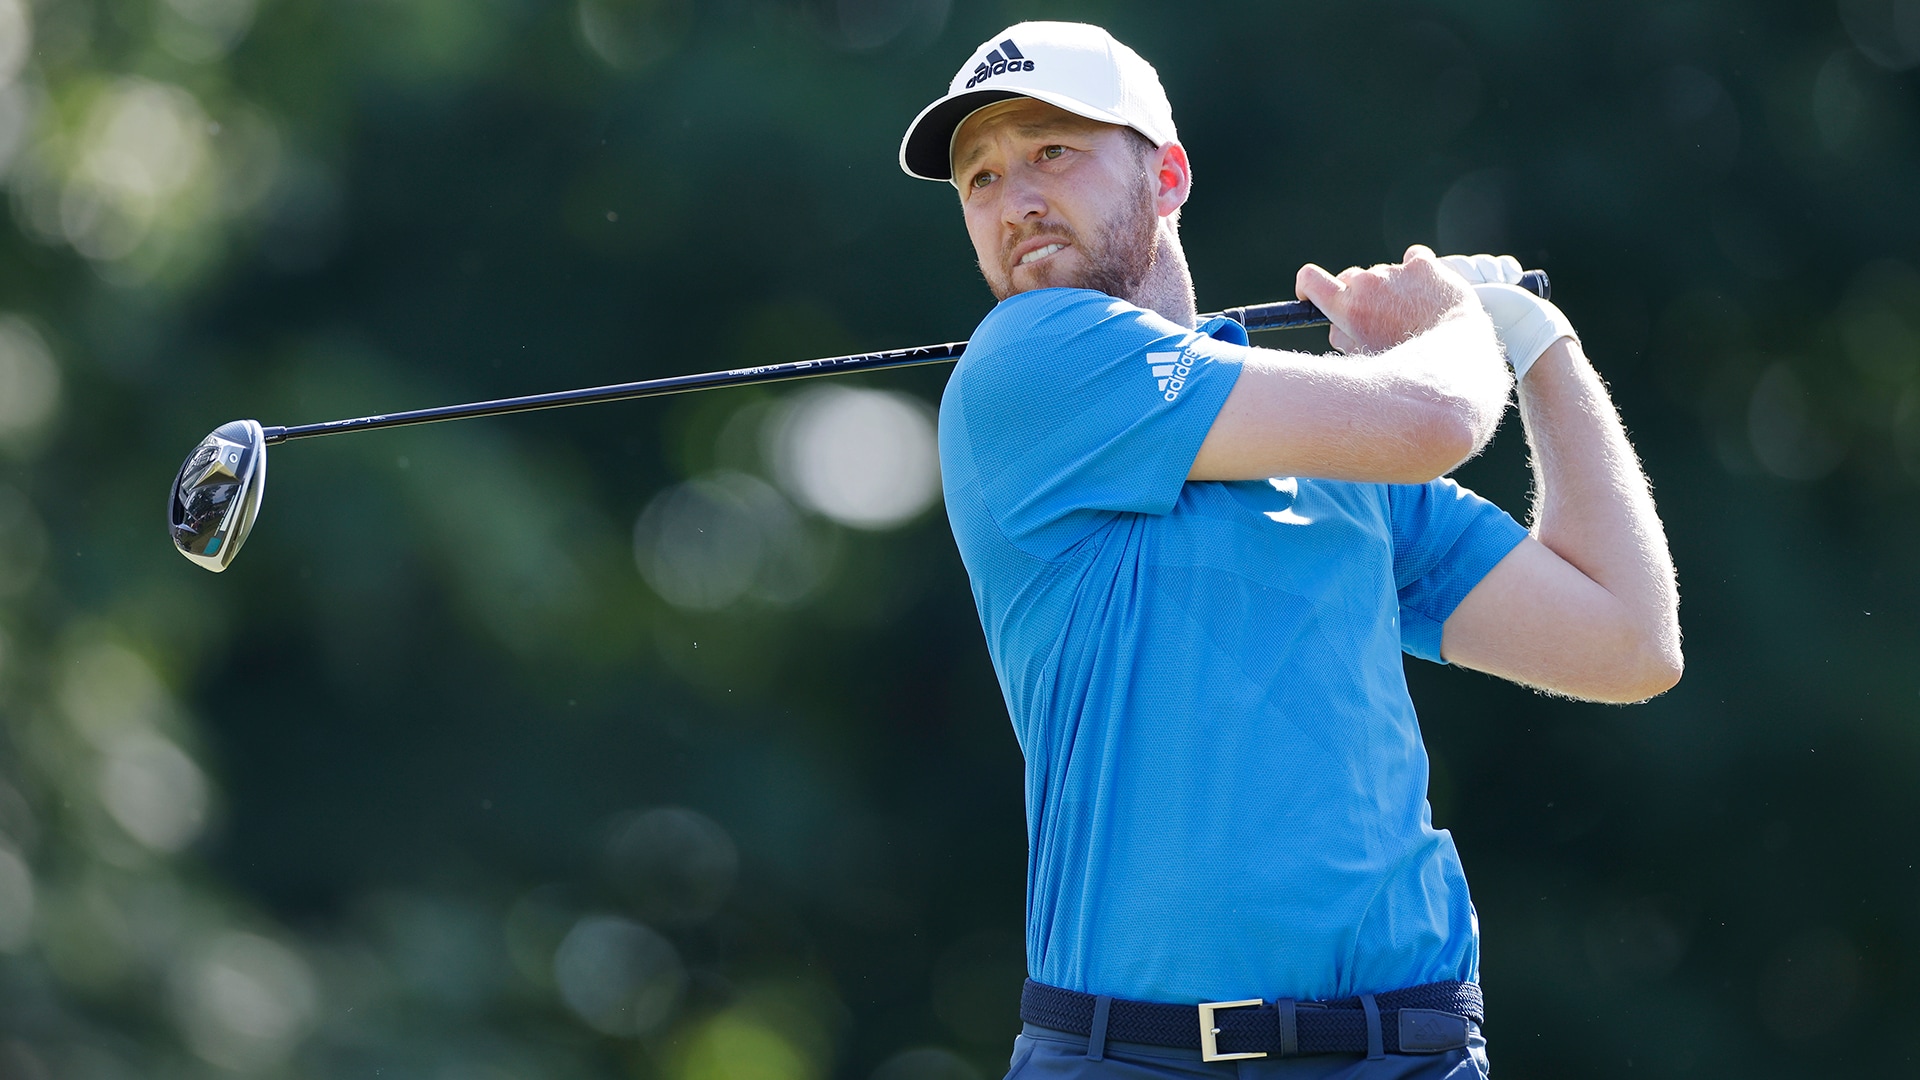 Daniel Berger WDs from 2023 U.S. Open qualifier; return from injury on hold